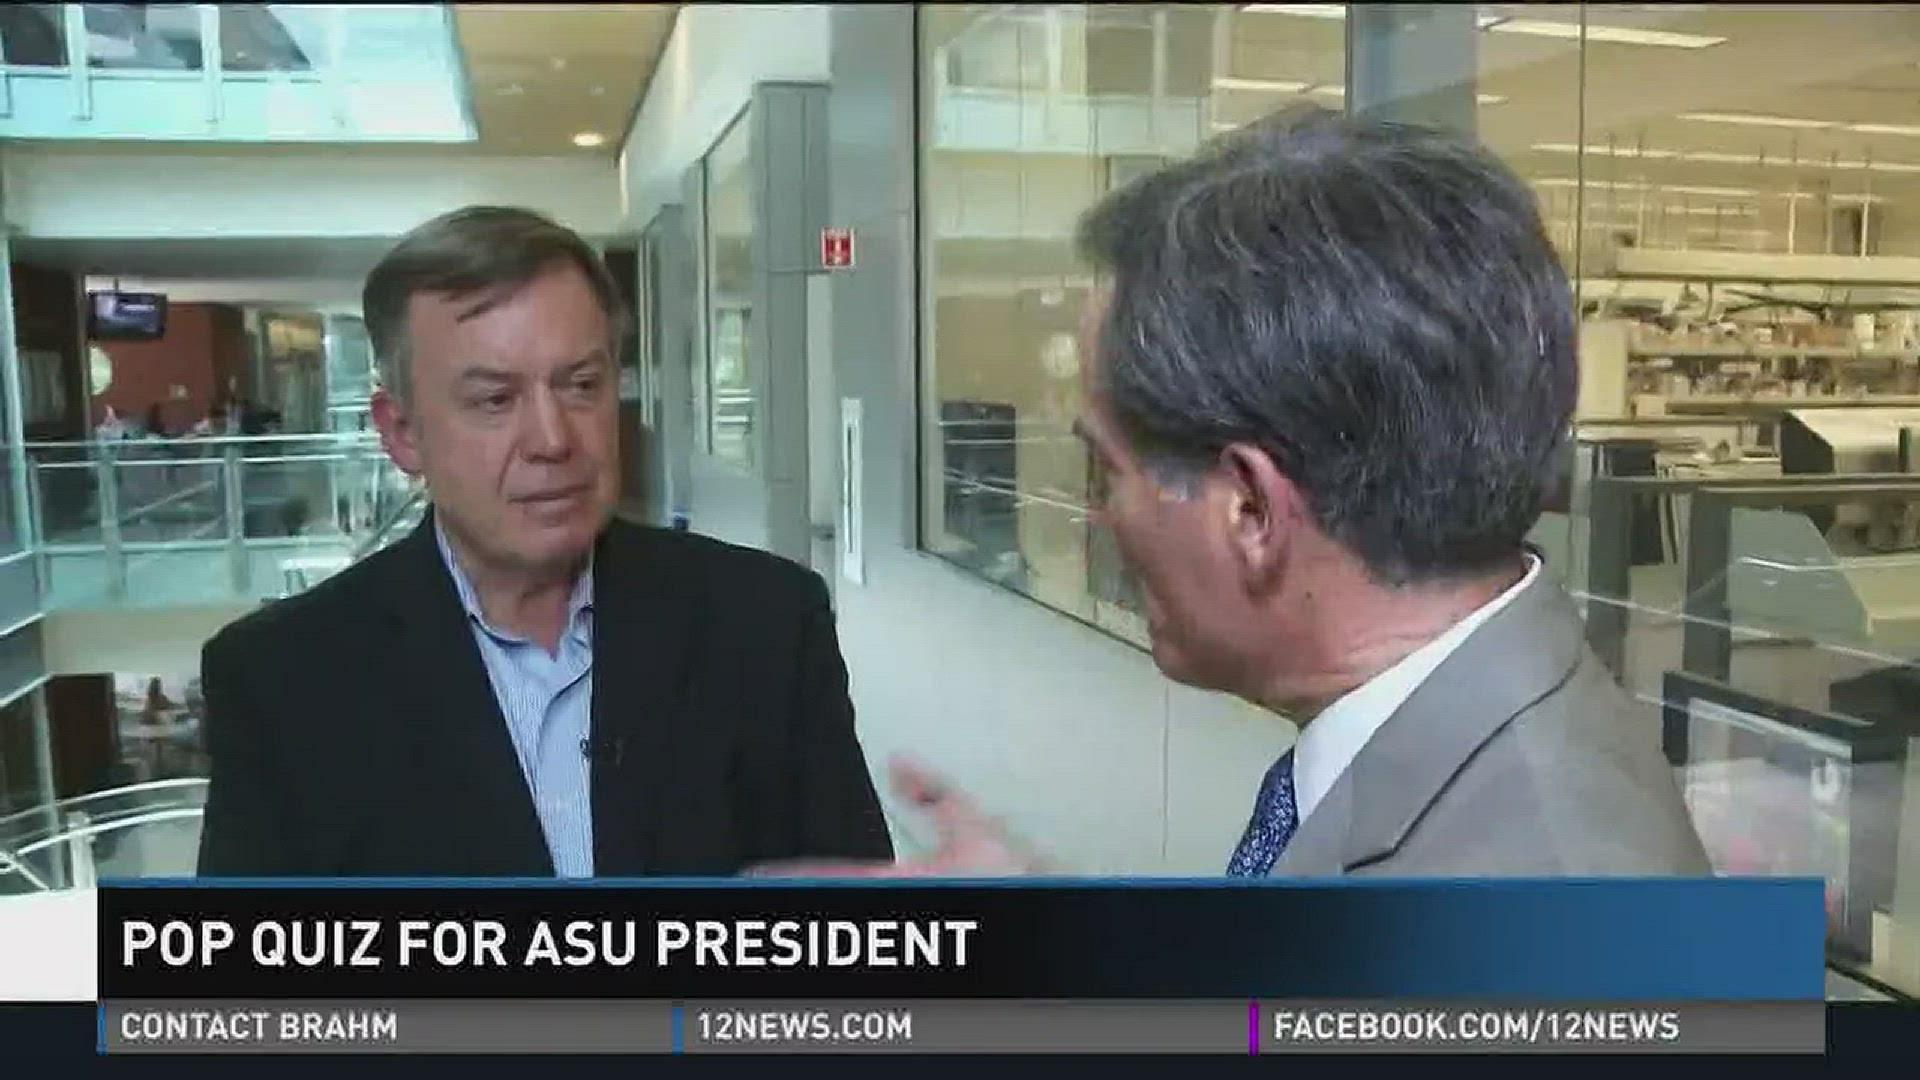 Harvard University's president is retiring. Does  Michael Crow want that job? Will ASU ever play in the Rose Bowl? And is that a Fitbit on his wrist?